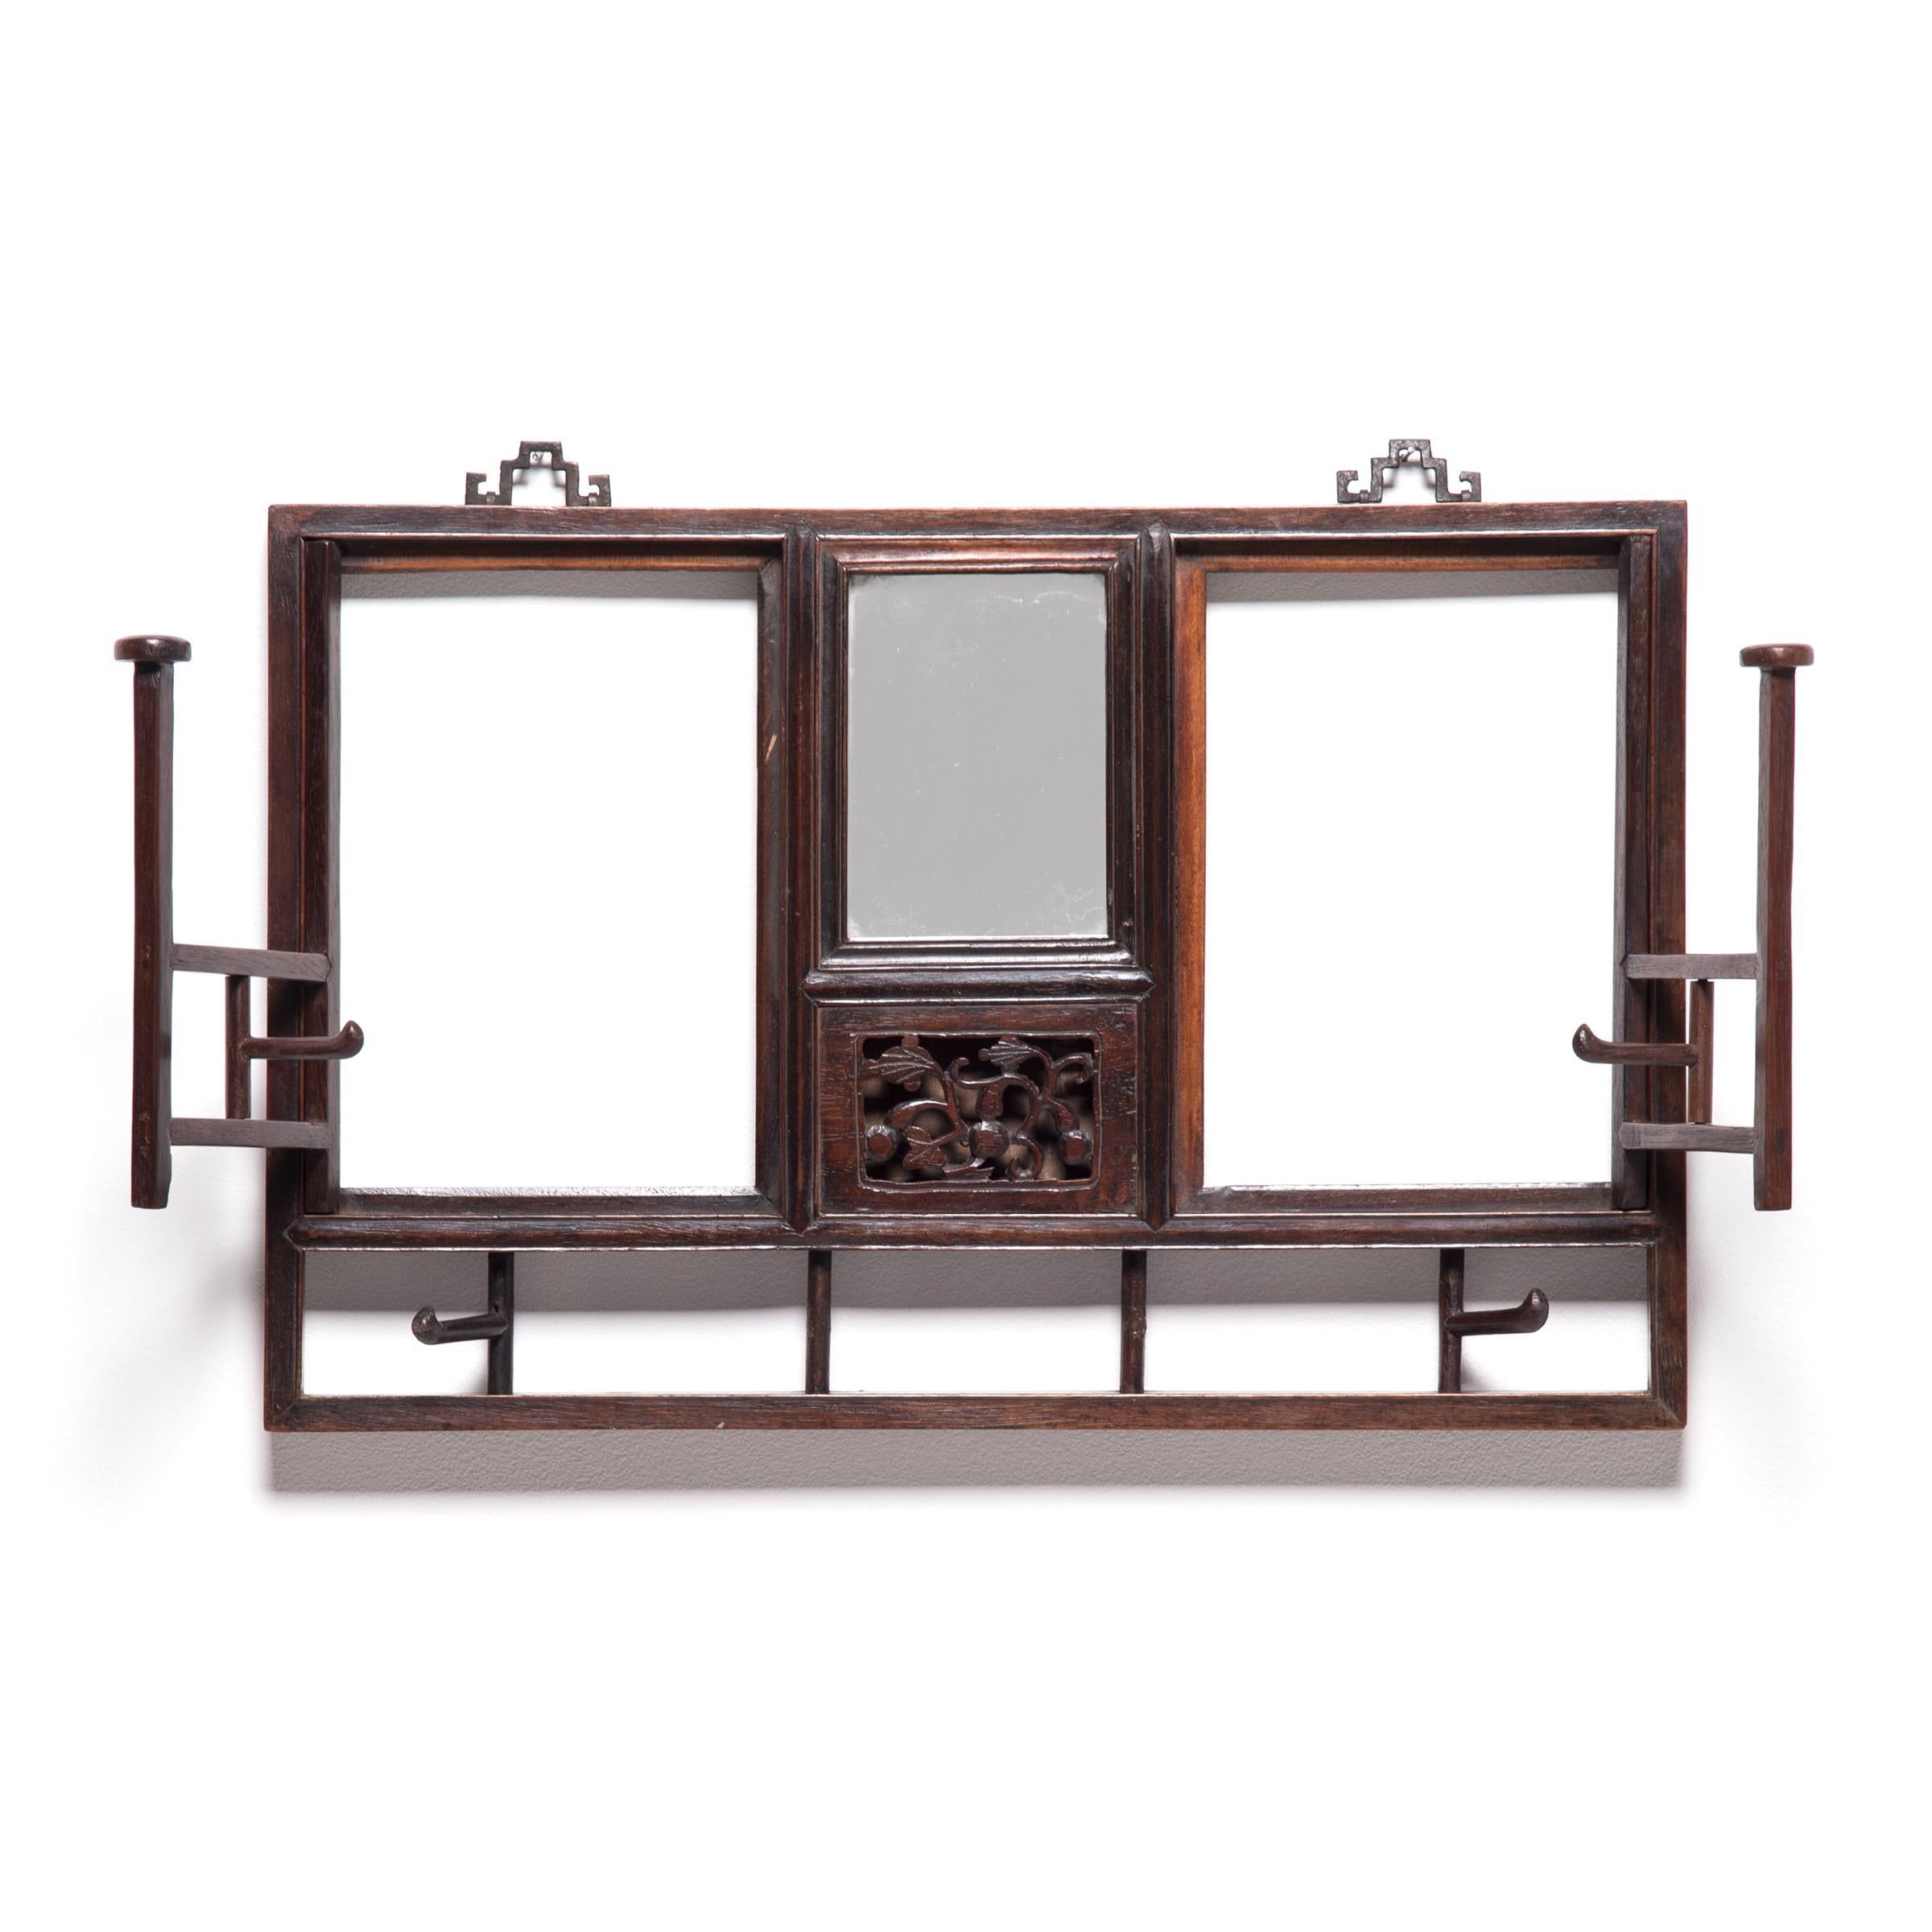 Hung on the wall of a Qing-dynasty home in northern China, this remarkably crafted hat rack provided the kind of elevated display that status-enhancing hats demanded. Beneath the central, compact mirror is an intricately carved hardwood panel of